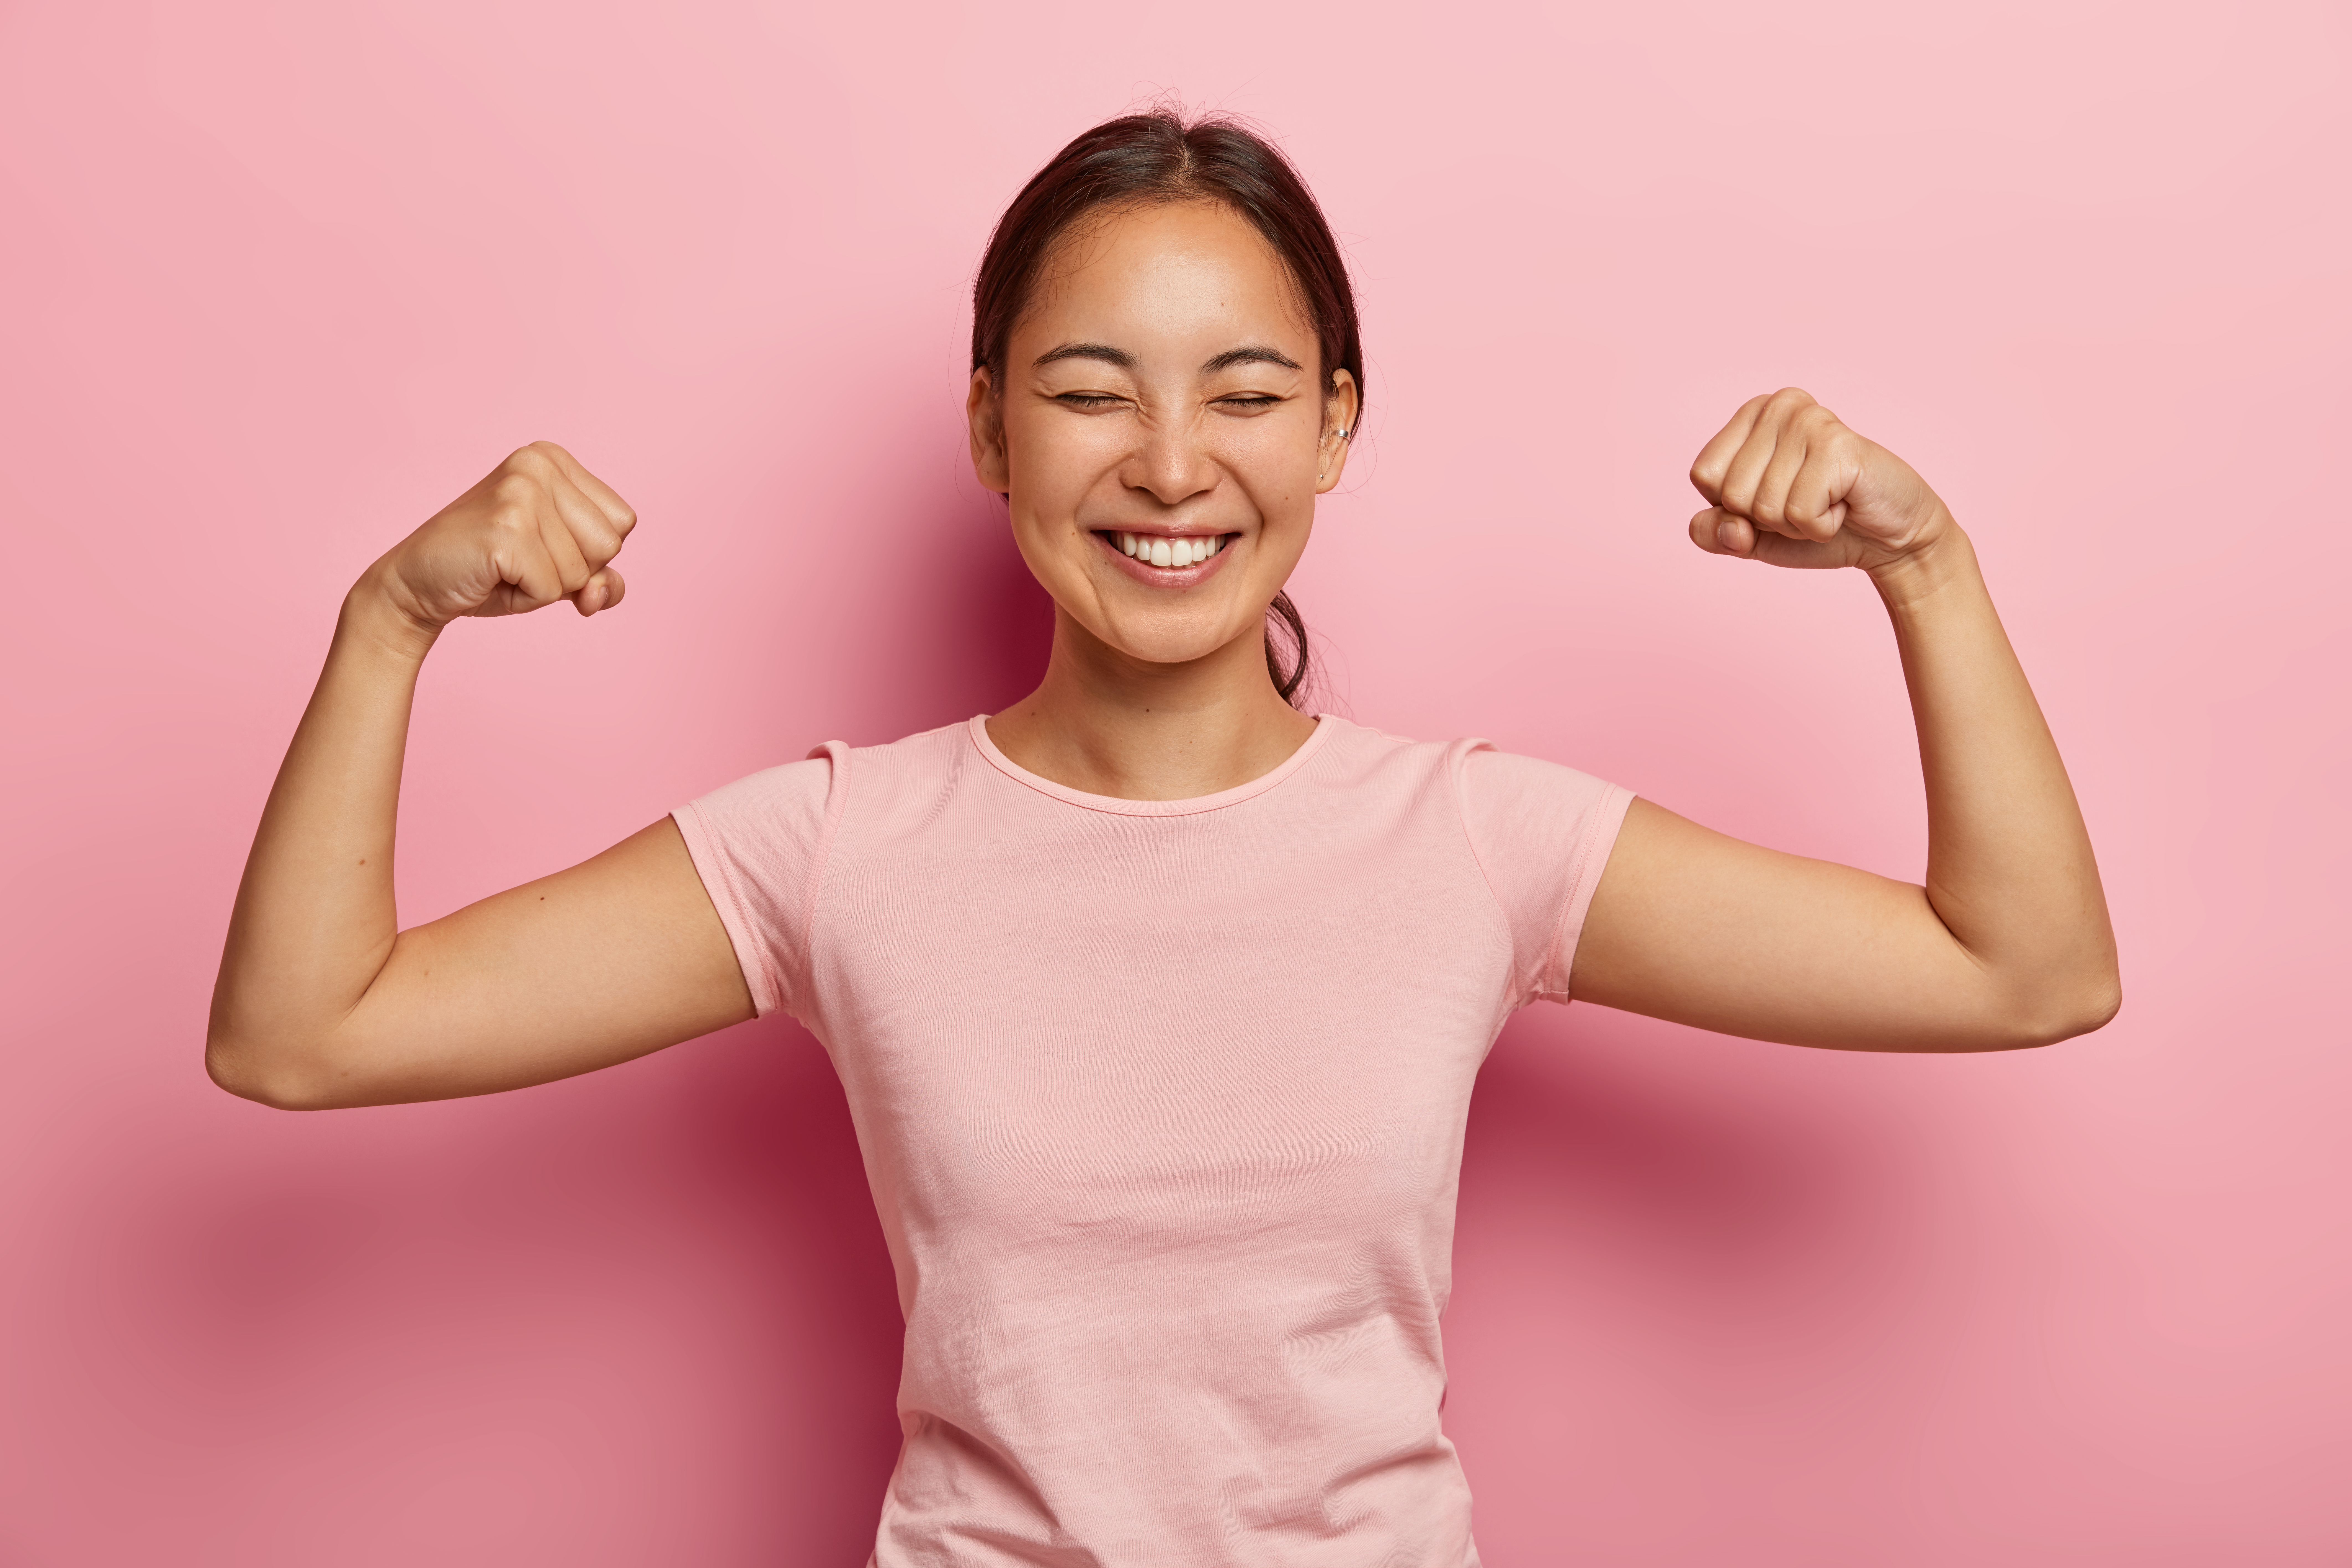 1630052998-strong-powerful-asian-woman-with-dark-combed-hair-toothy-smile-raises-arms-shows-biceps-has-piercing-ear-wears-casual-rosy-t-shirt-models-against-pink-wall-look-my-muscles.jpg